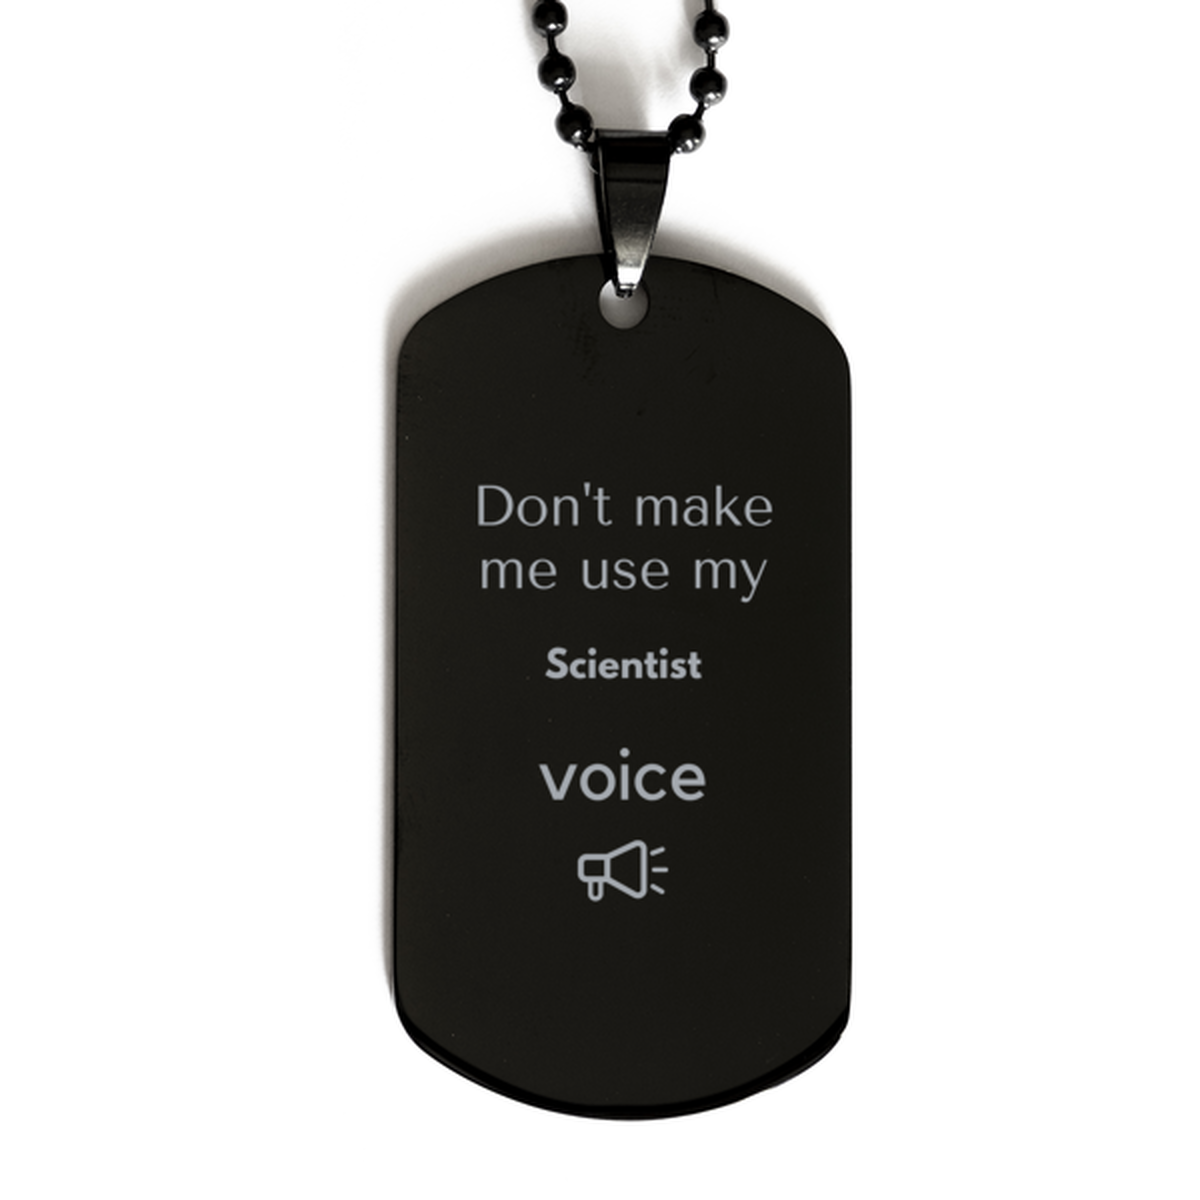 Don't make me use my Scientist voice, Sarcasm Scientist Gifts, Christmas Scientist Black Dog Tag Birthday Unique Gifts For Scientist Coworkers, Men, Women, Colleague, Friends